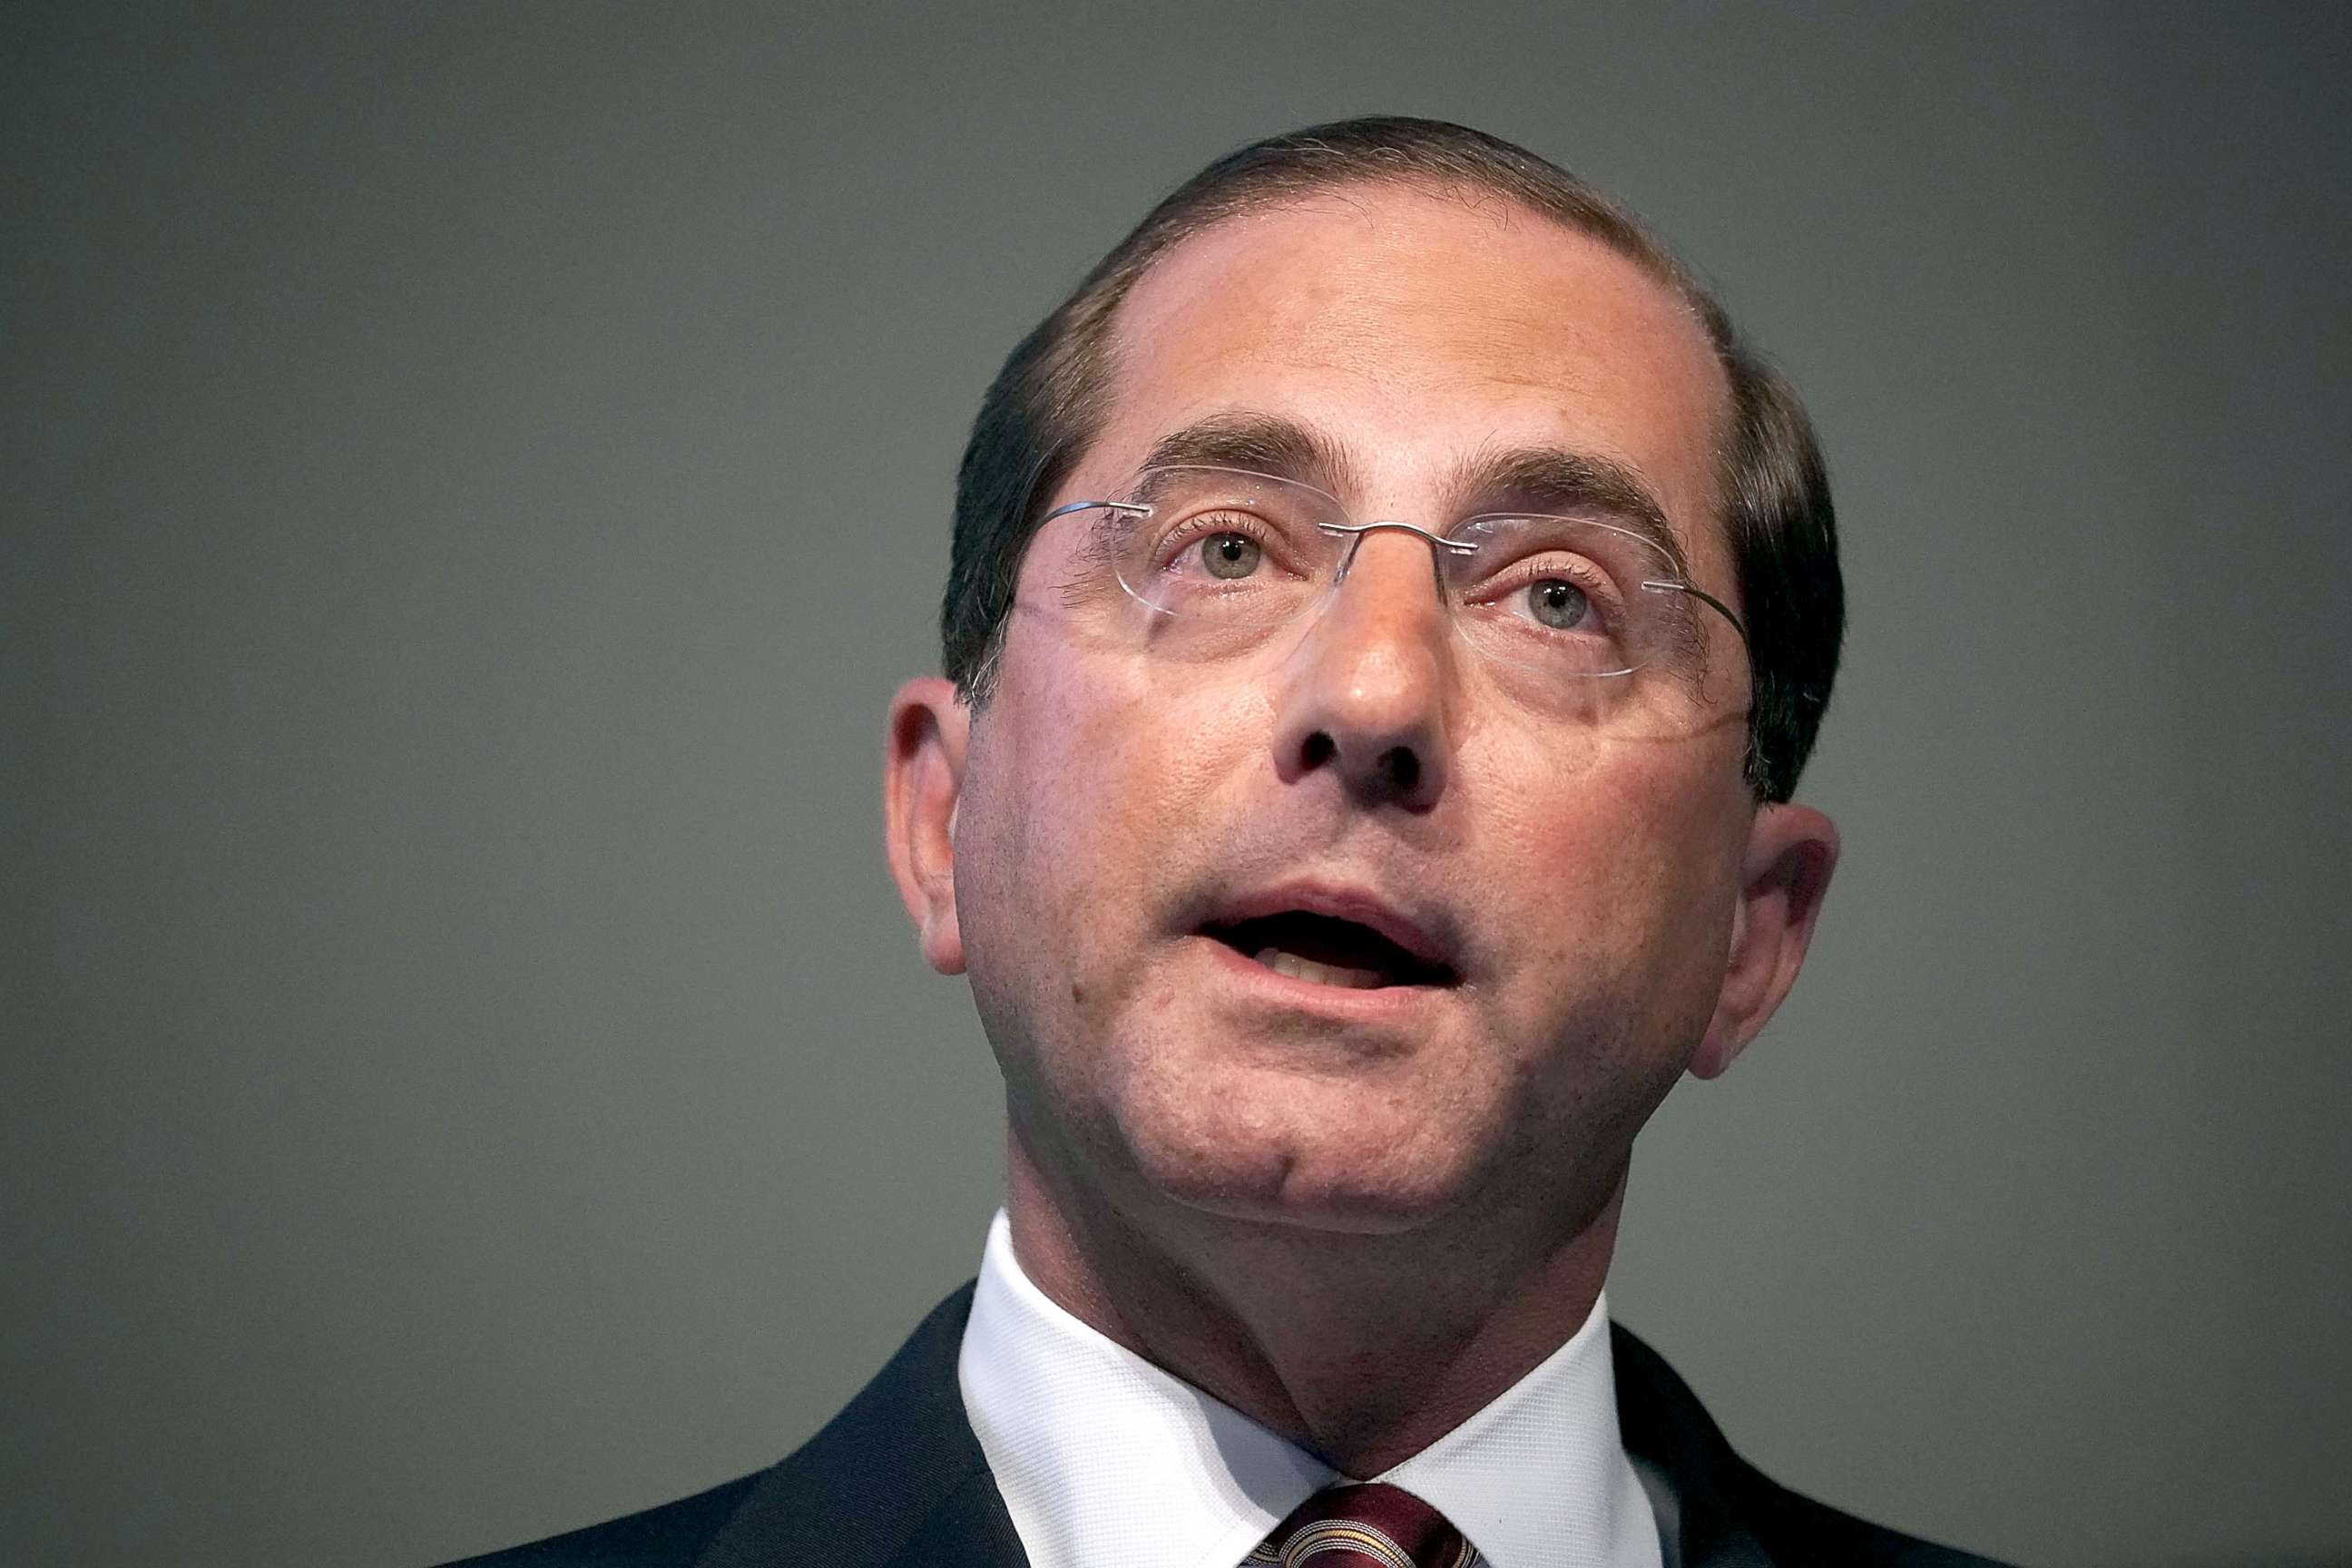 PHOTO: U.S. Secretary of Health and Human Services Alex Azar speaks on prescription drugs for the market during the 2018 National Academy of Medicine Annual Meeting, Oct. 15, 2018, at the National Academy of Sciences in Washington, DC.